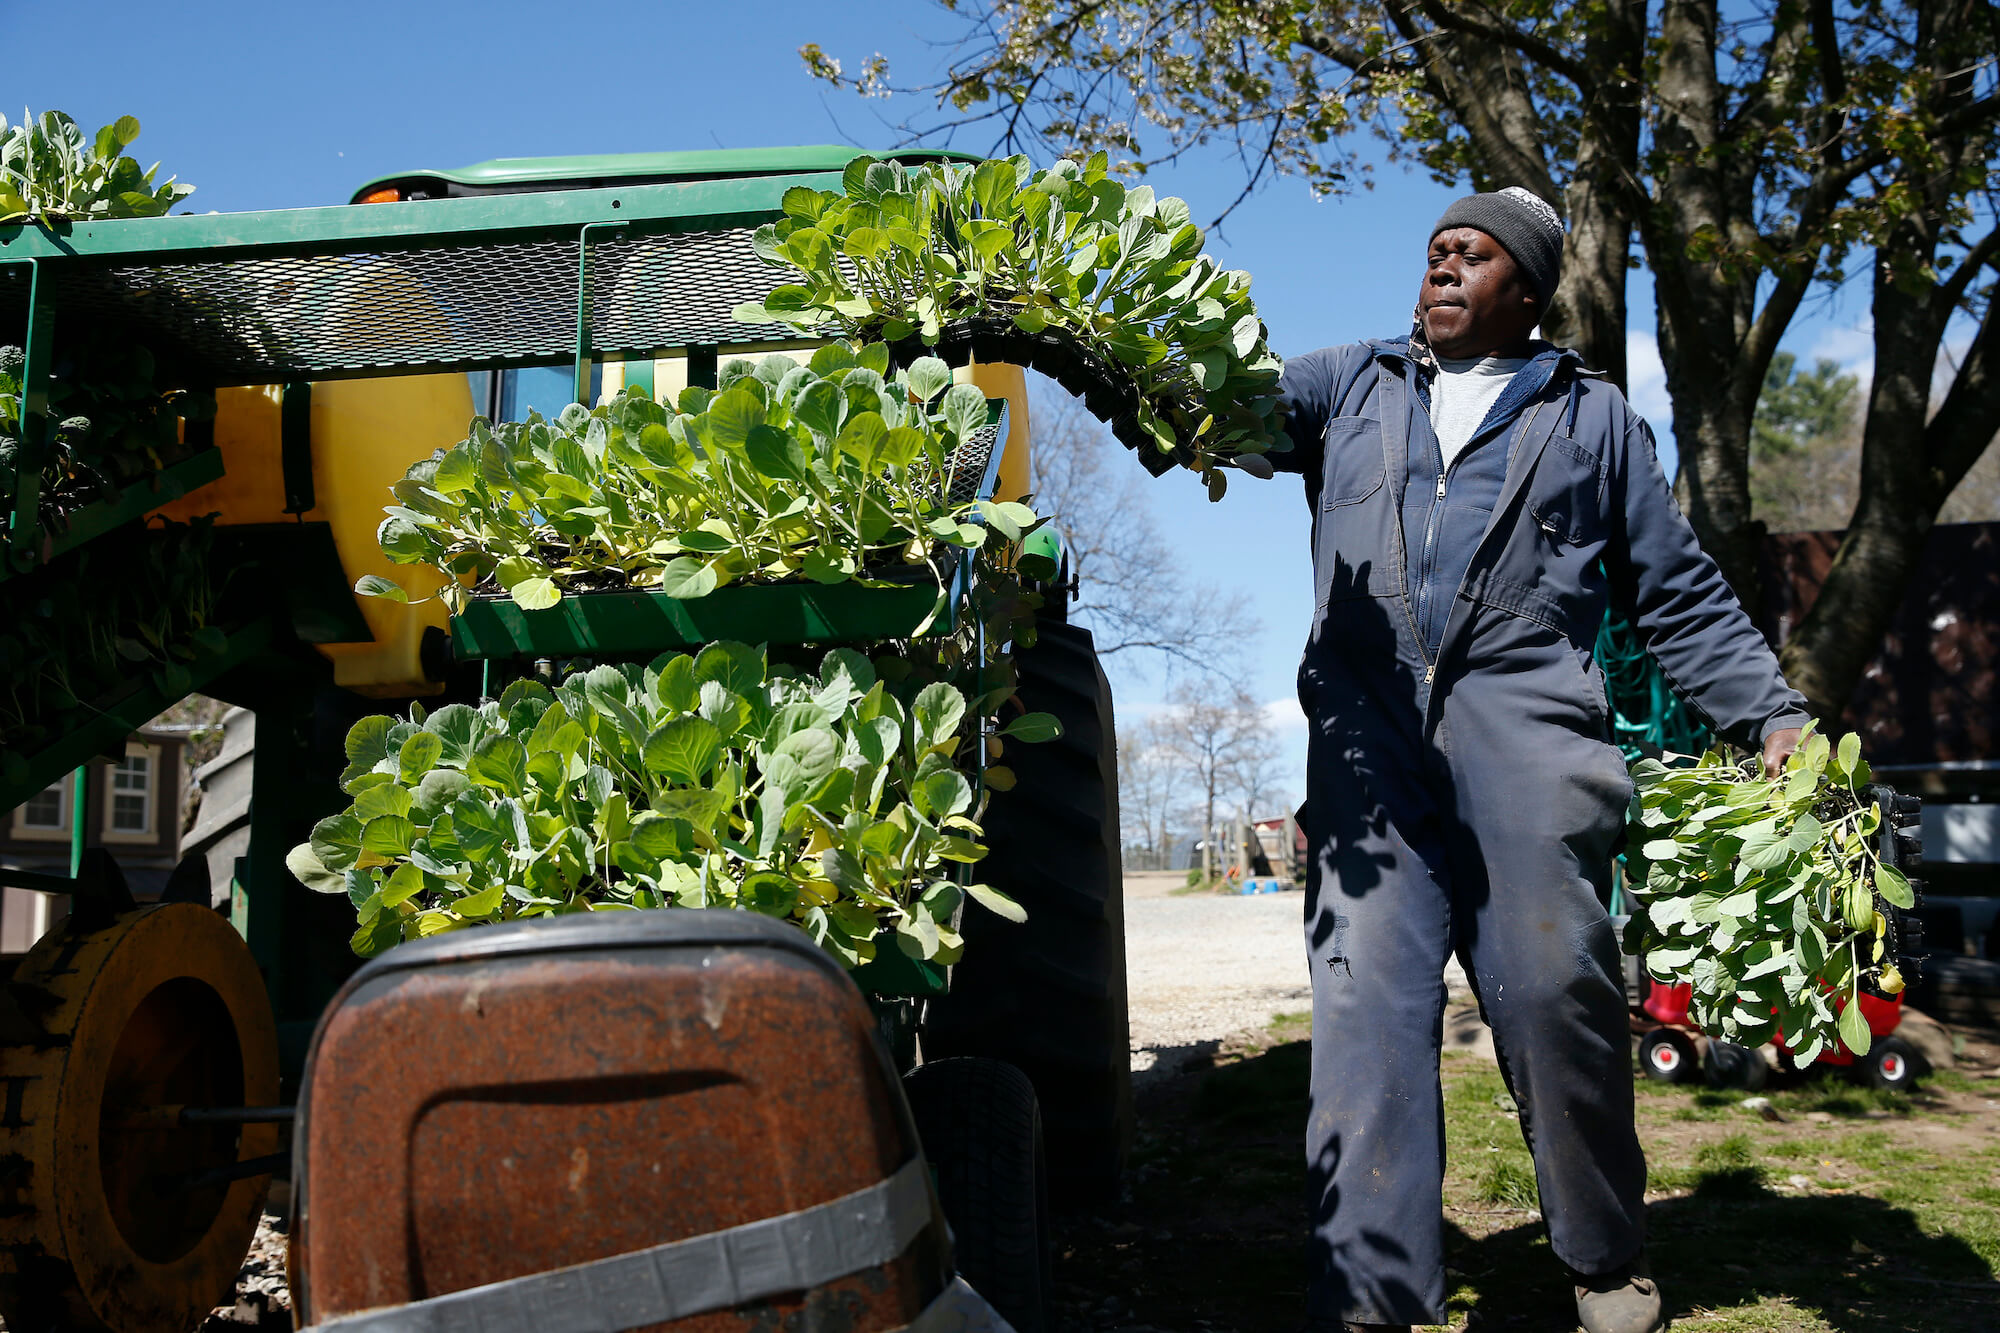 LITTLETON, MA - MAY 13: A SpringDell Farm employee carries out flats of cabbage that are ready to be planted in the field in Littleton, MA on May 13, 2020. June 2021